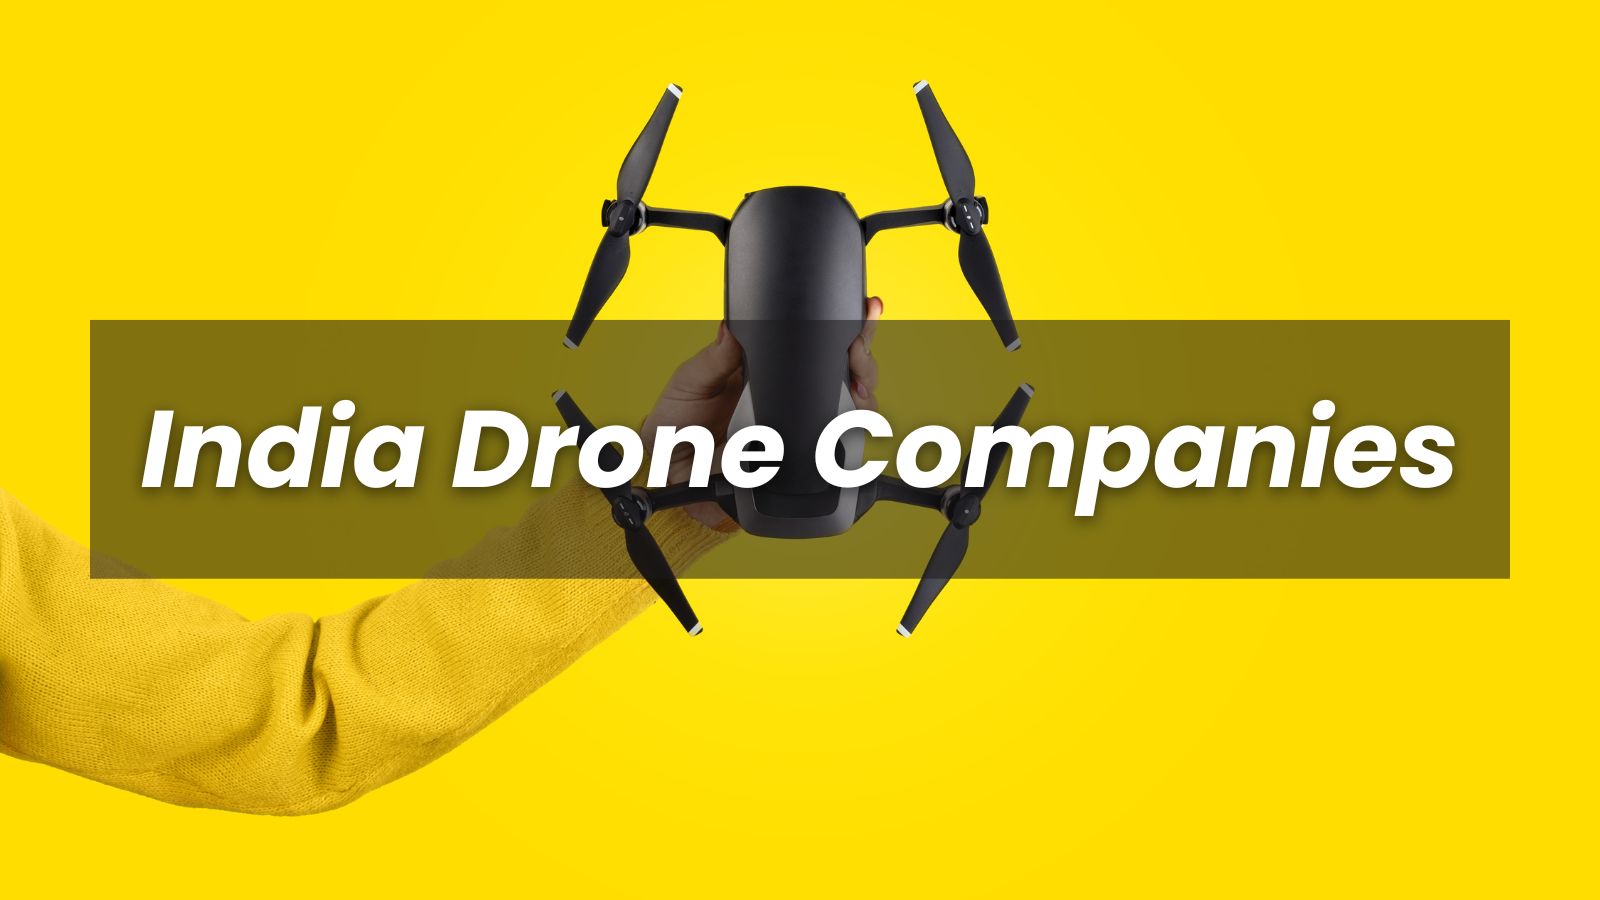 List of Drone Companies in India